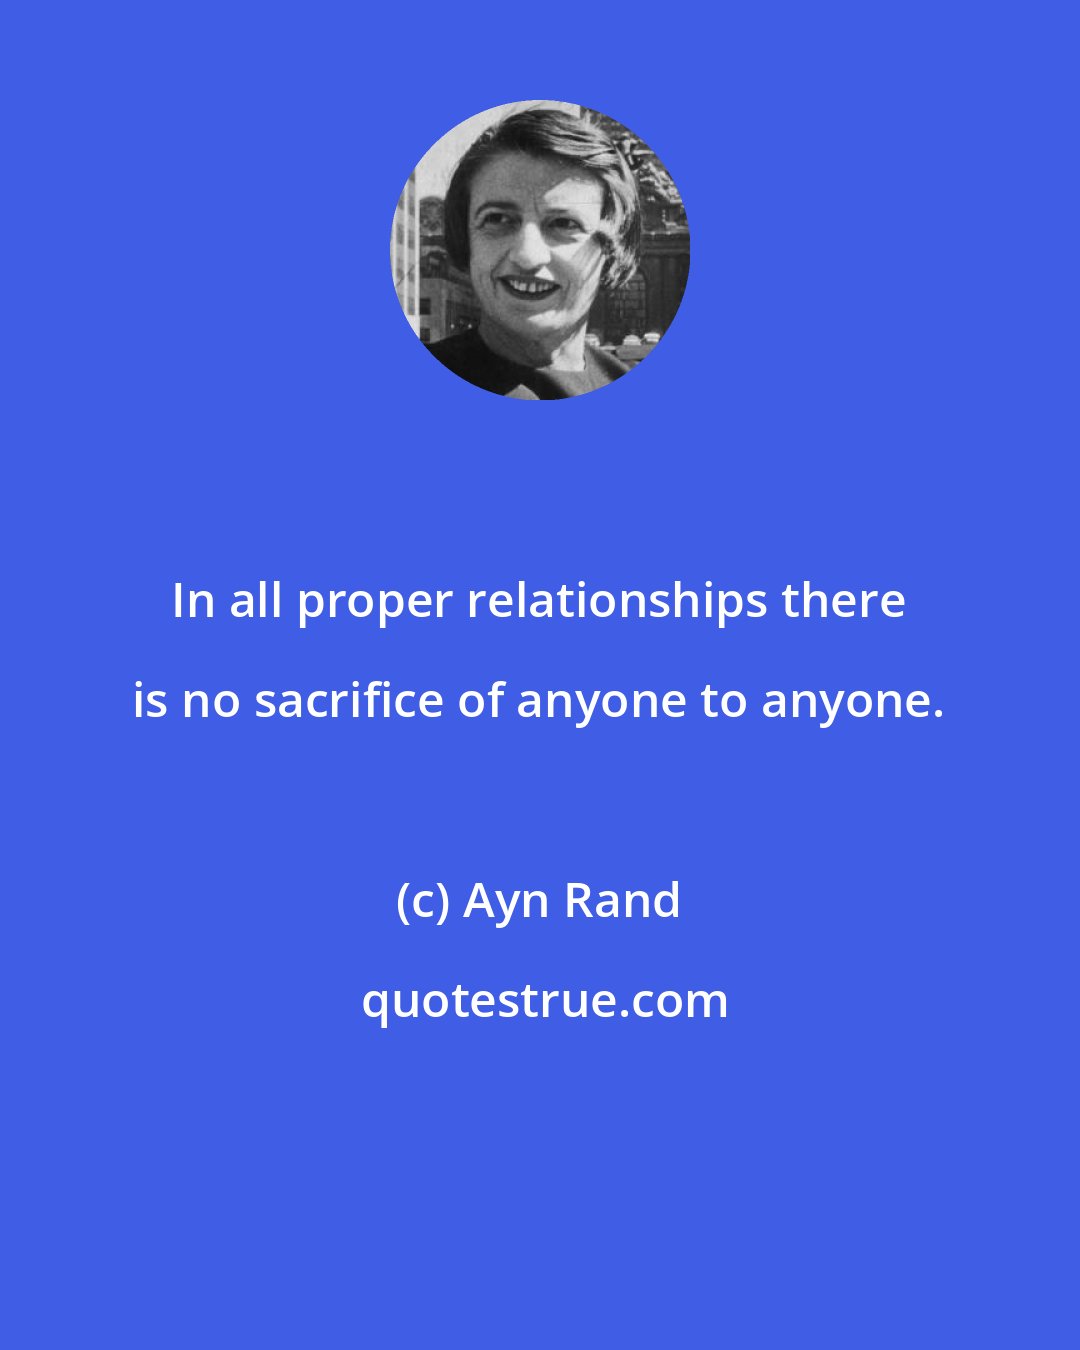 Ayn Rand: In all proper relationships there is no sacrifice of anyone to anyone.